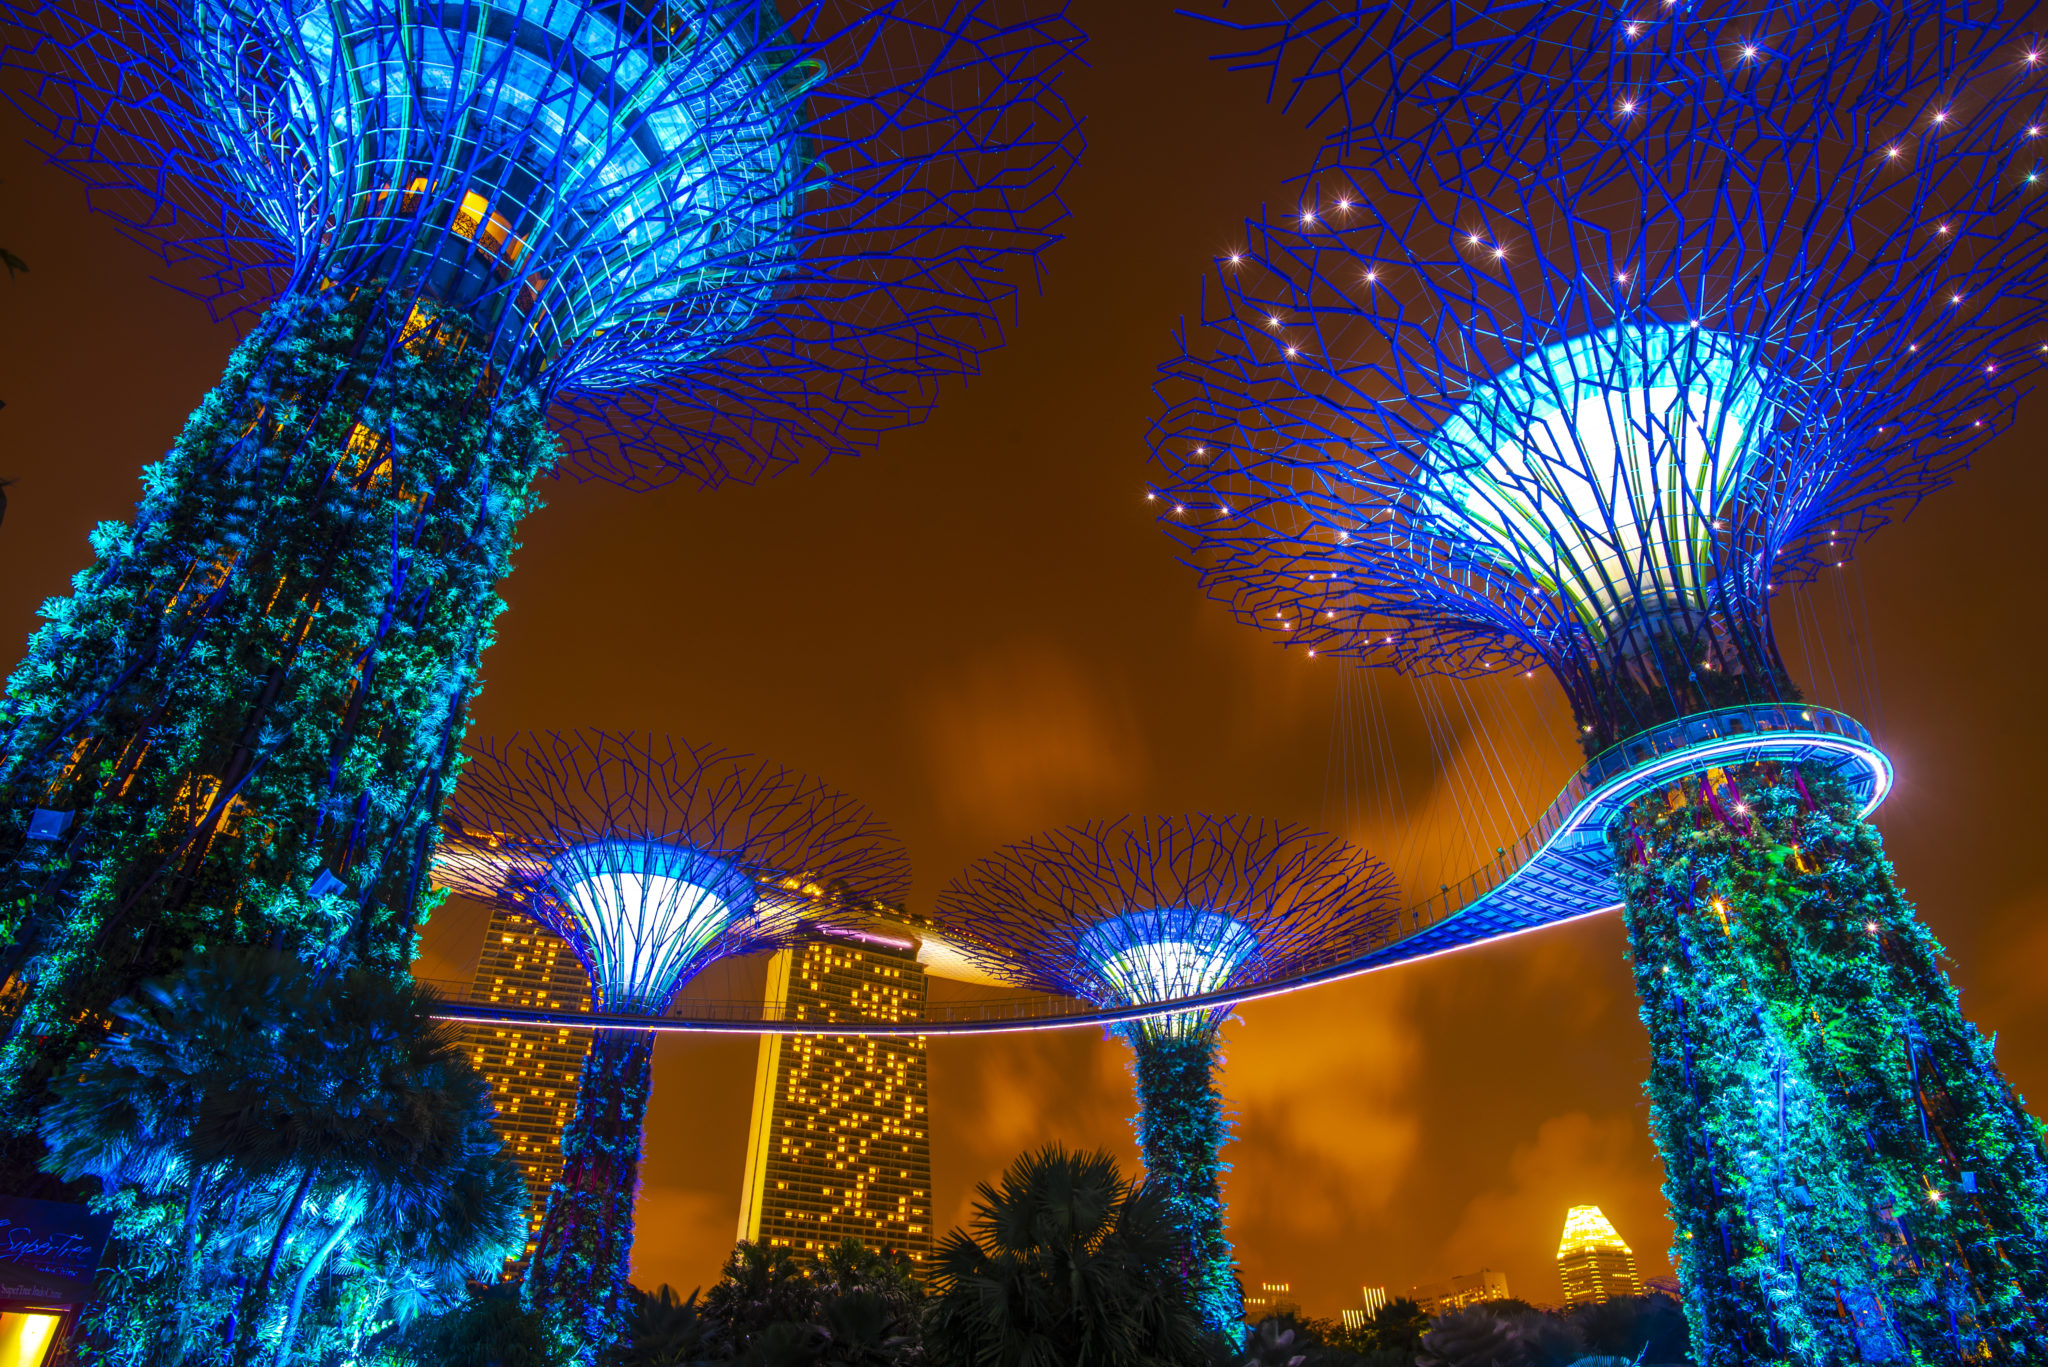 Supertree garden at night in Garden by the bay, Singapore